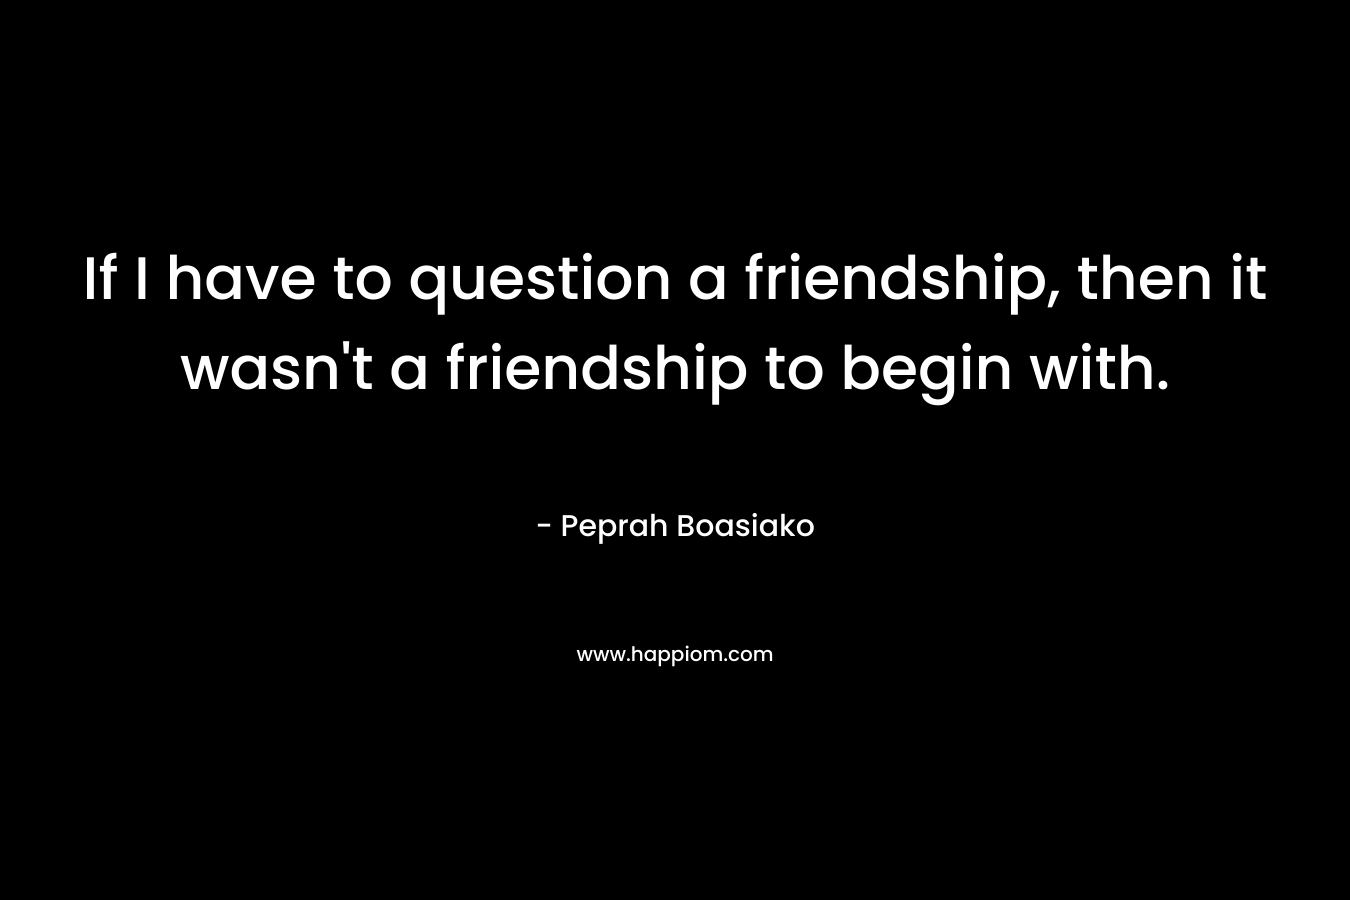 If I have to question a friendship, then it wasn't a friendship to begin with.